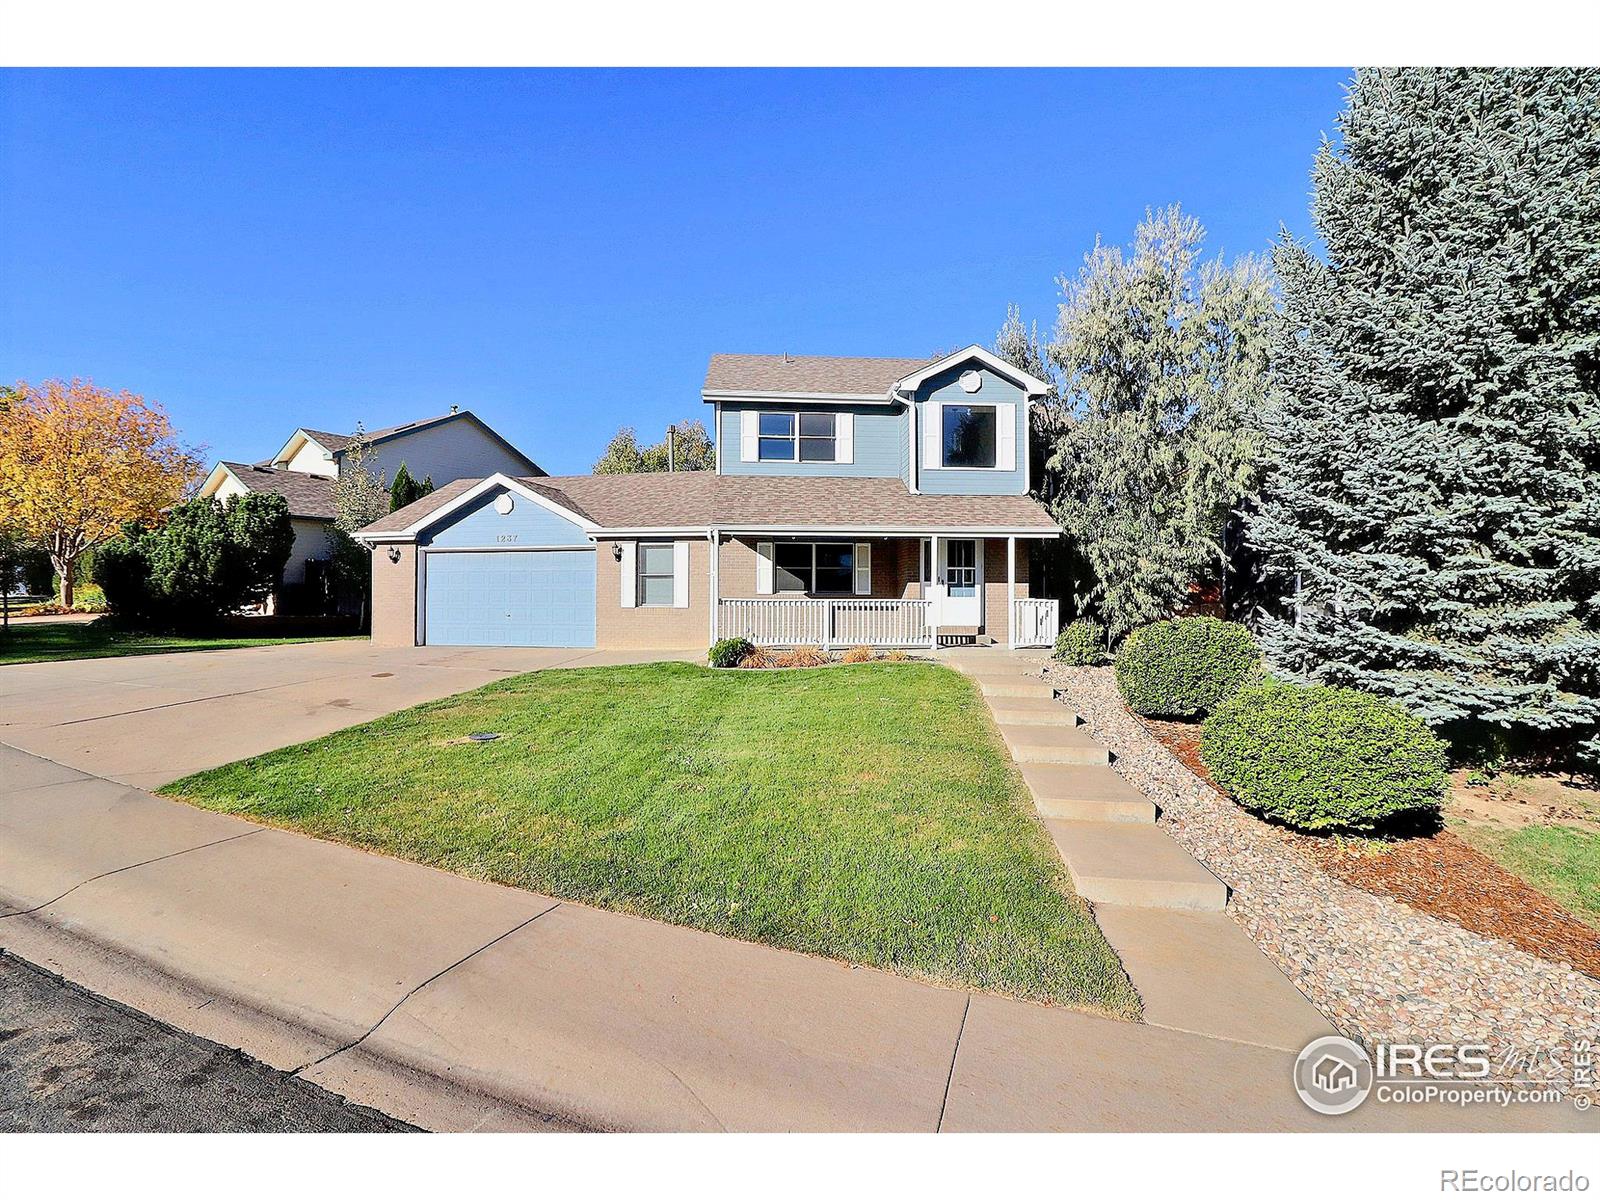 1237  51st Ave Ct, greeley MLS: 456789999005 Beds: 3 Baths: 4 Price: $459,000